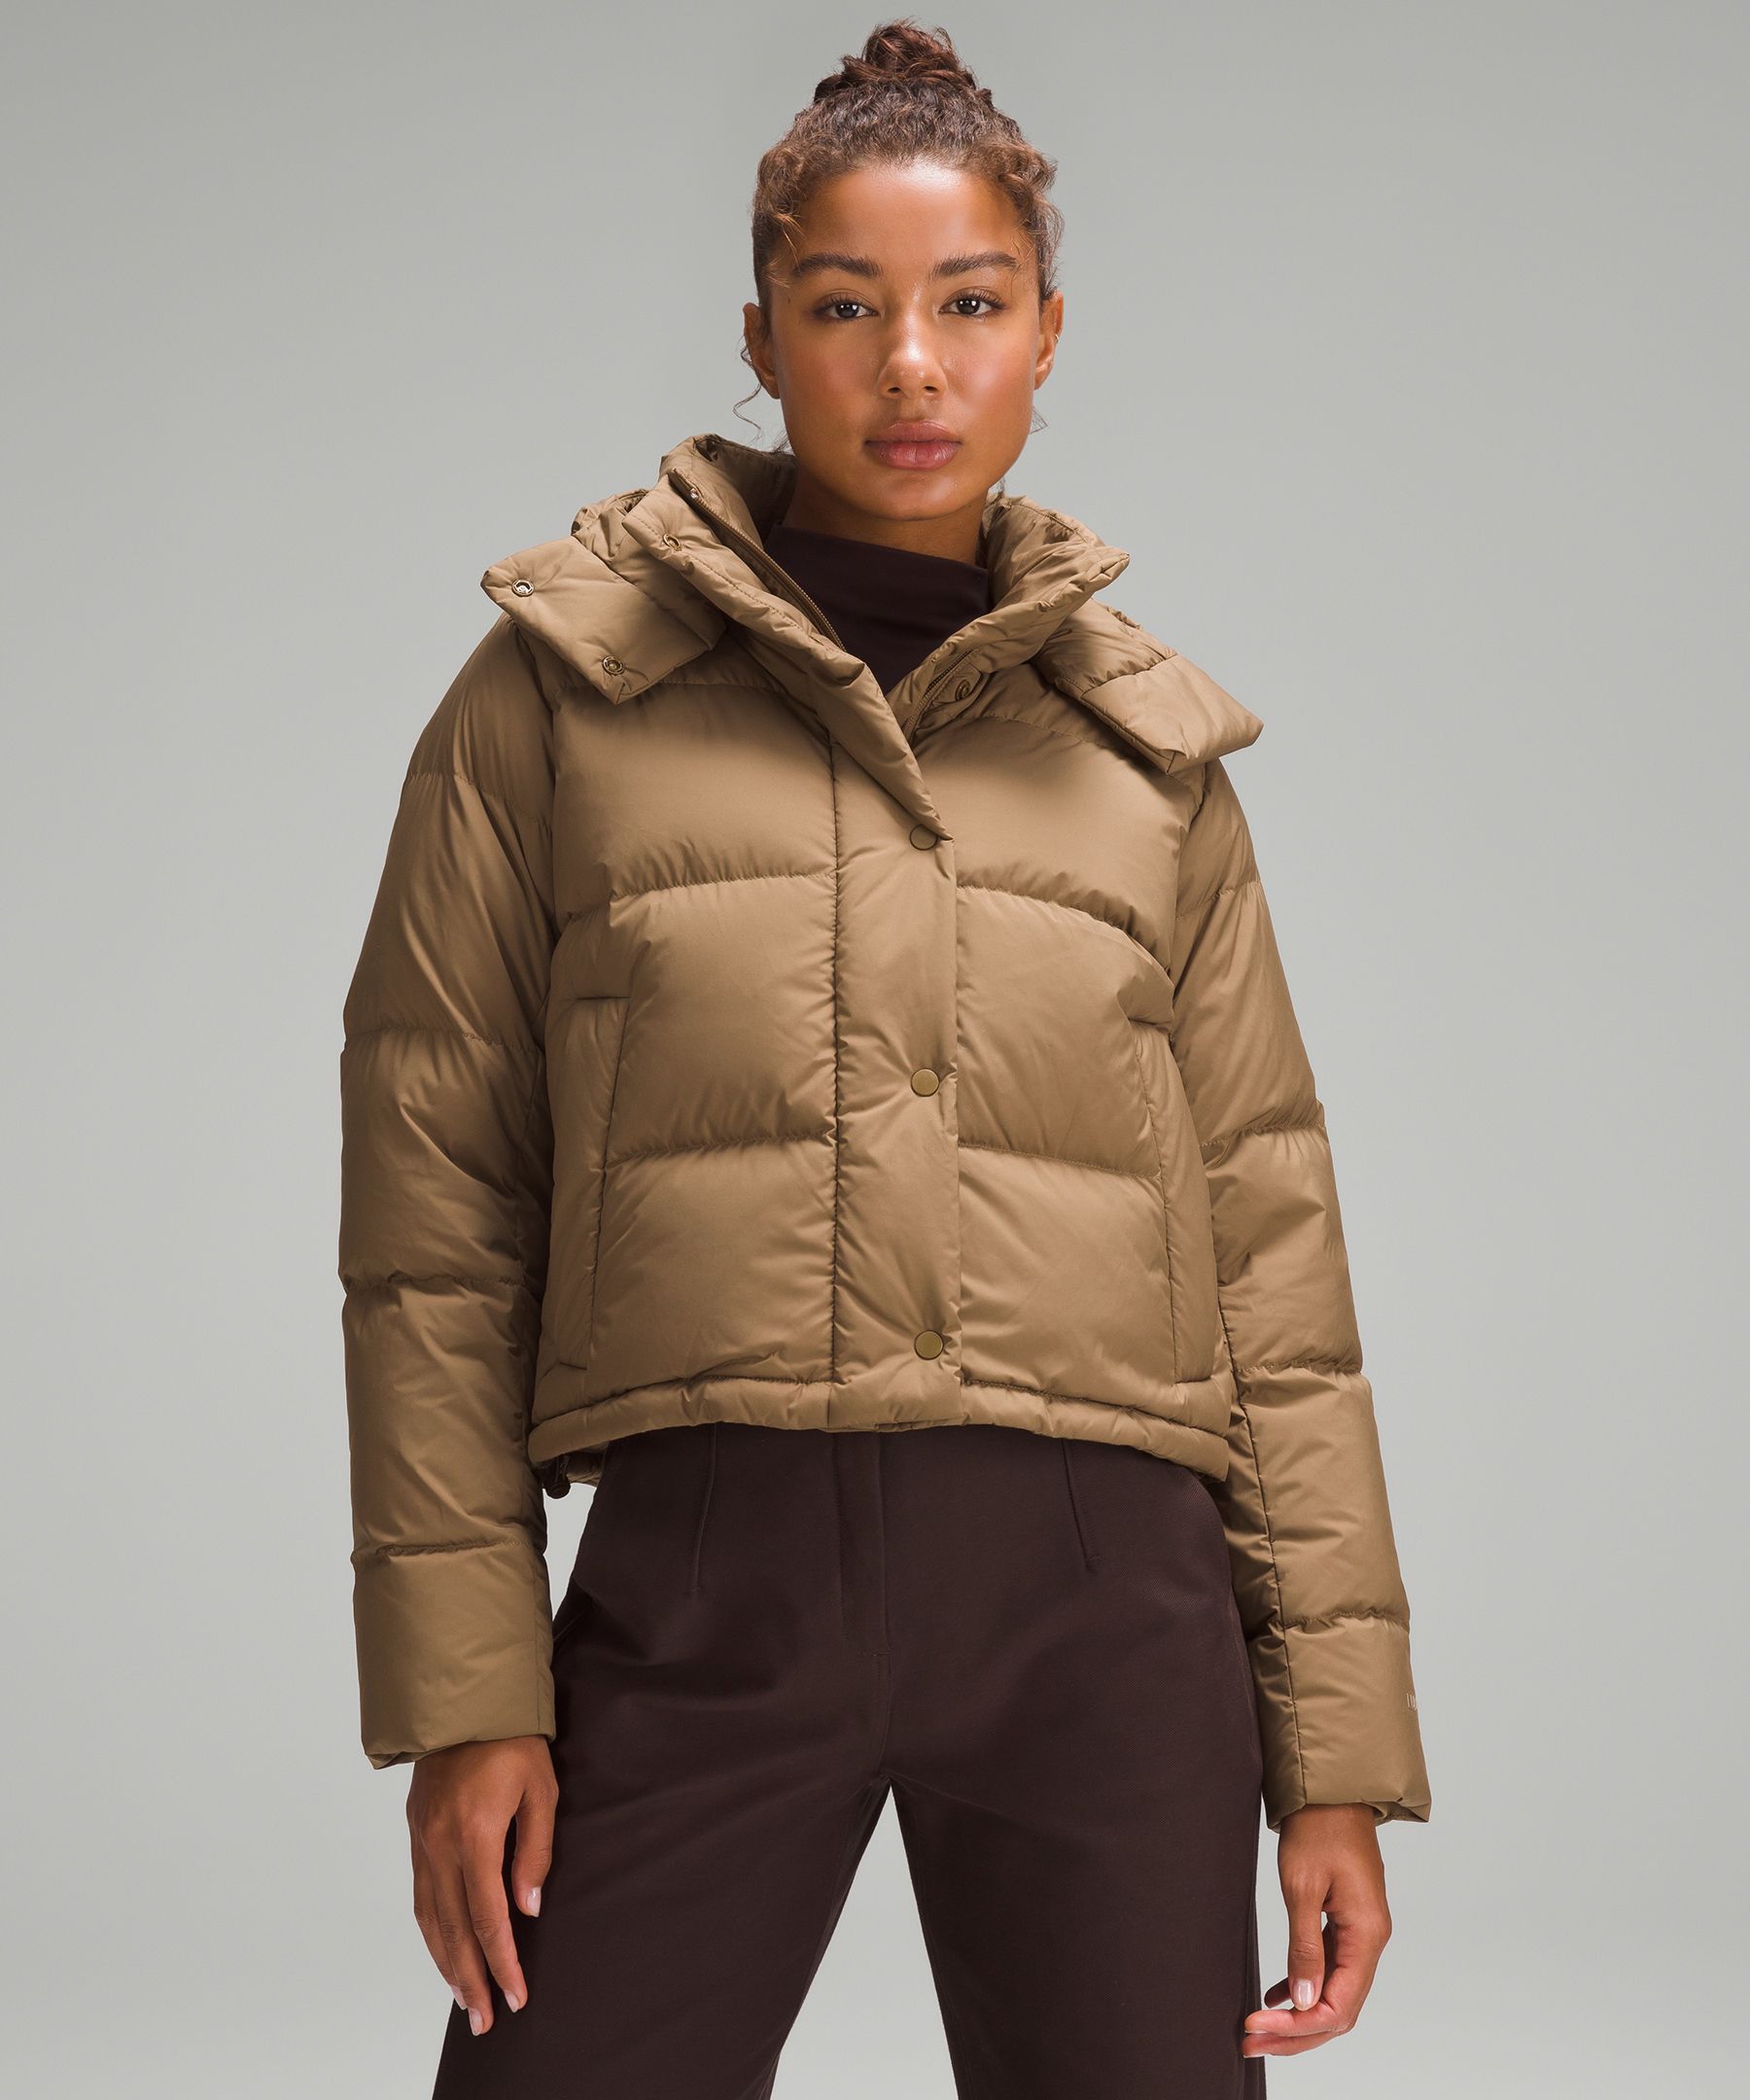 lululemon athletica Removable Sleeves Puffer Coats & Jackets for Women